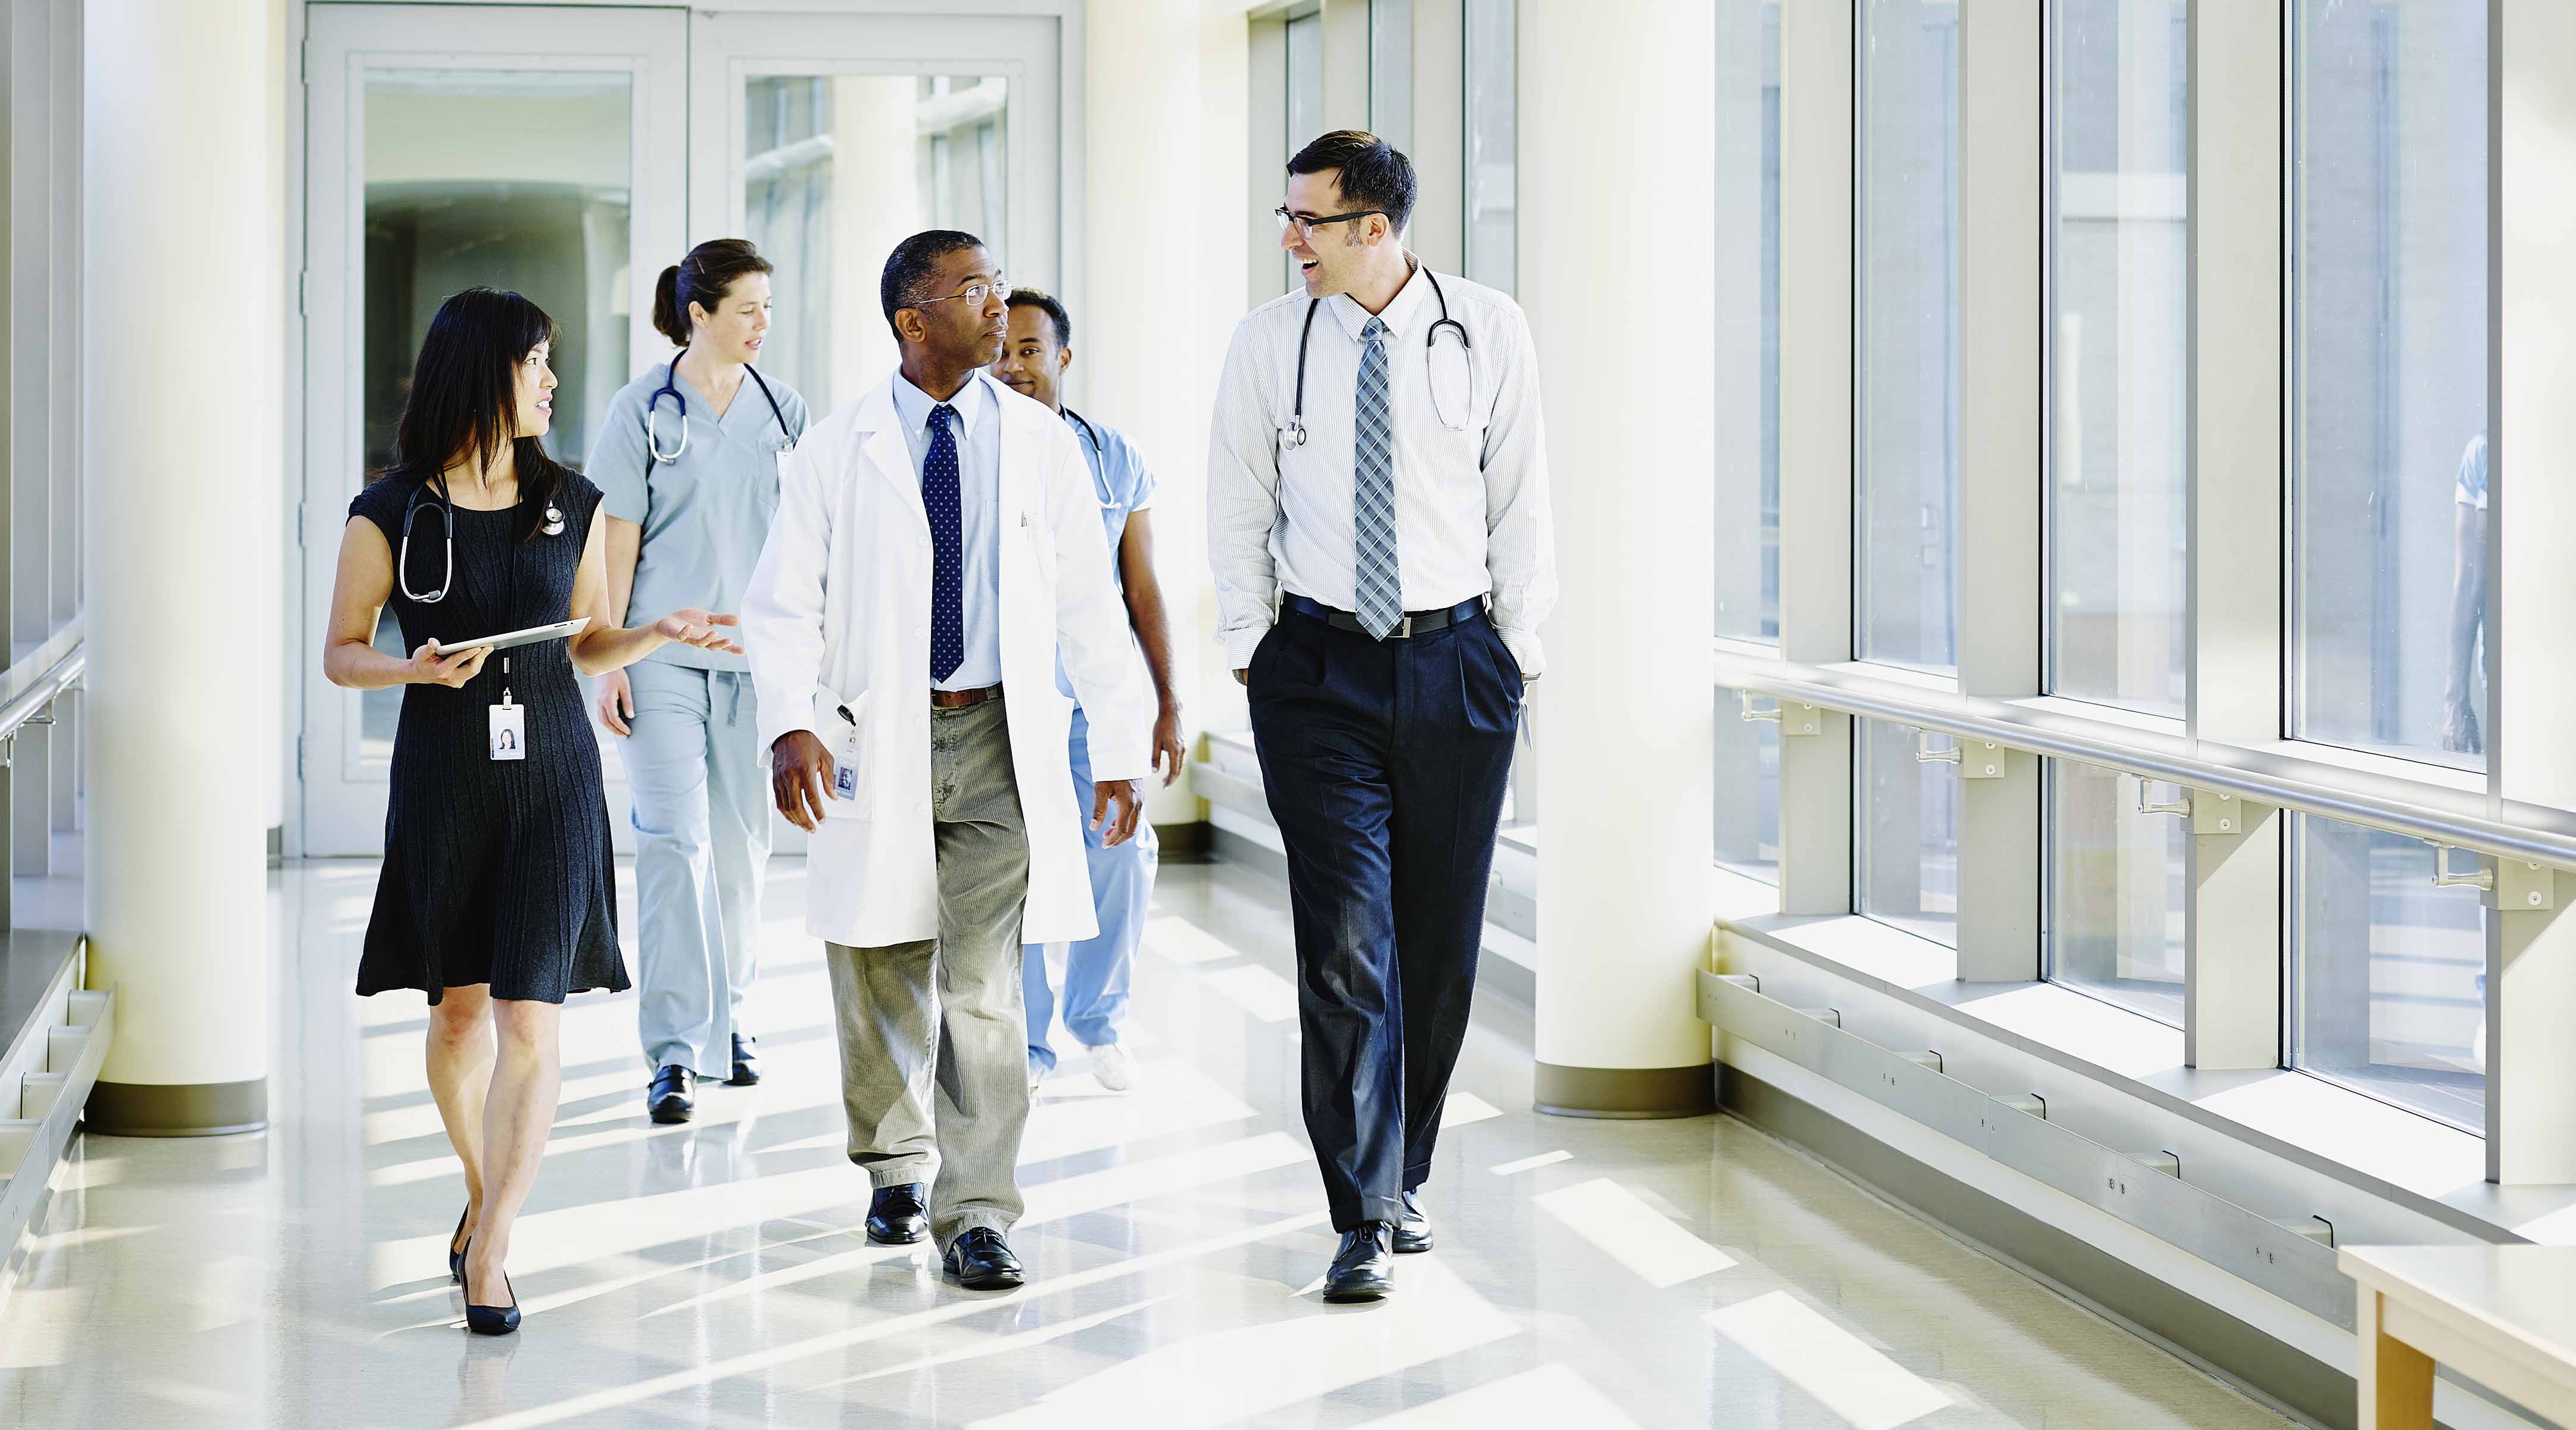 A group of doctors have a conversation while walking down a hallway.